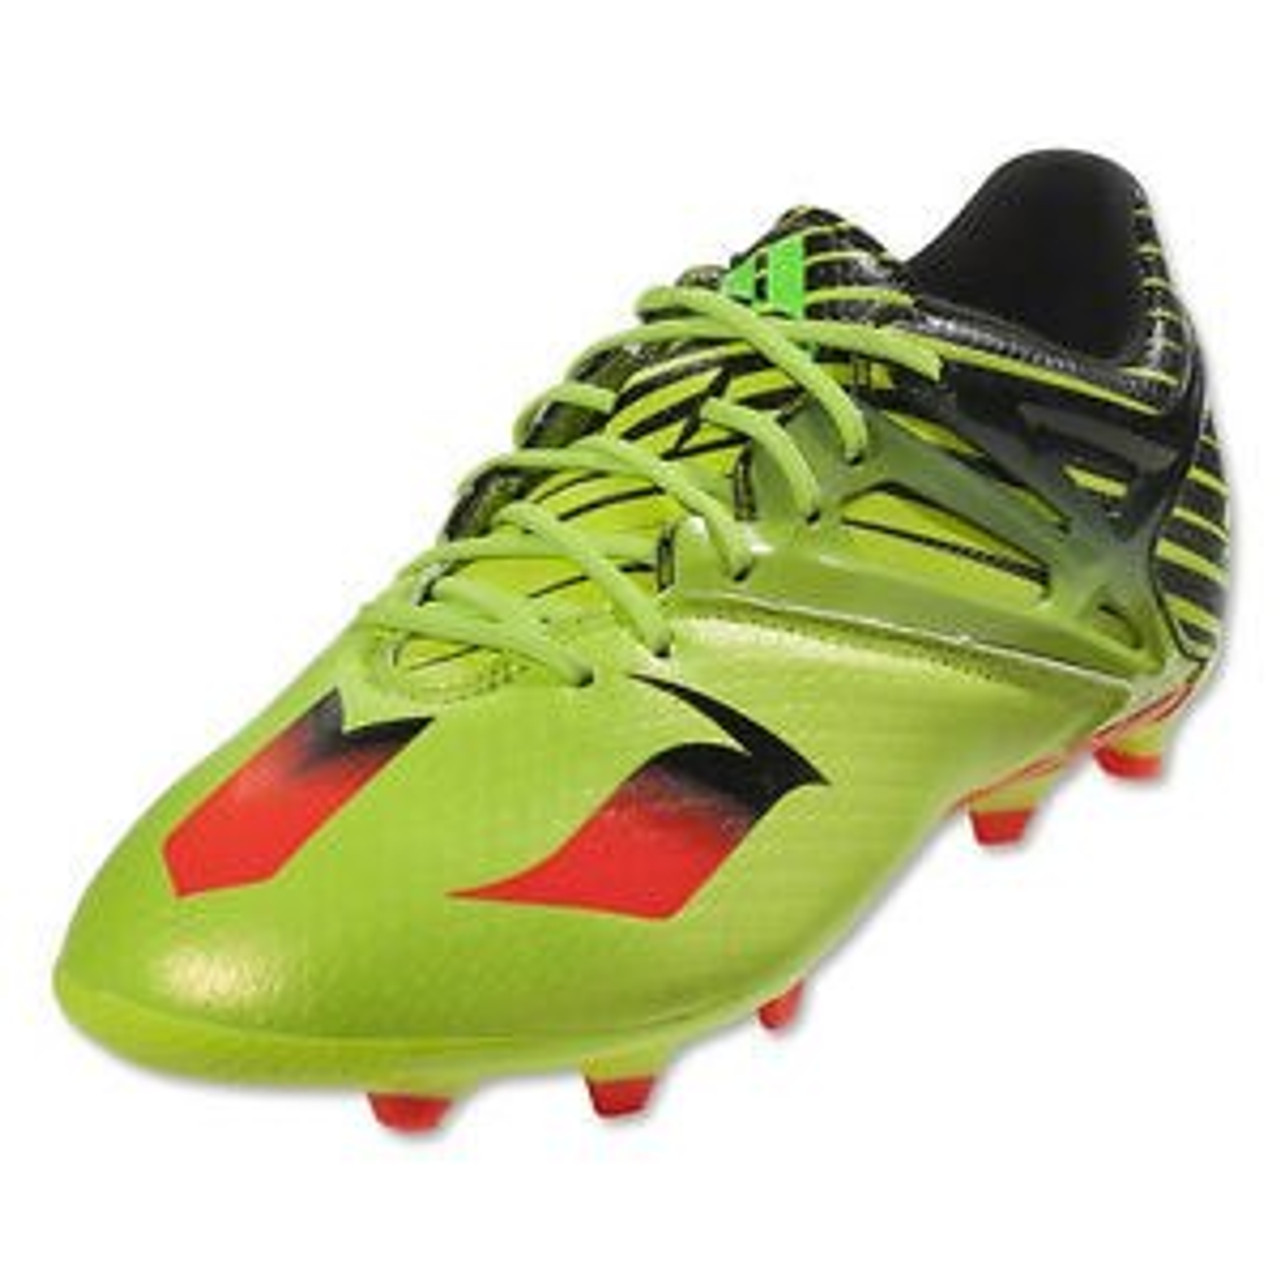 Adidas Messi Youth 15.1 - Semi Solar Slime/Solar Red/Black (010423) - ohp soccer